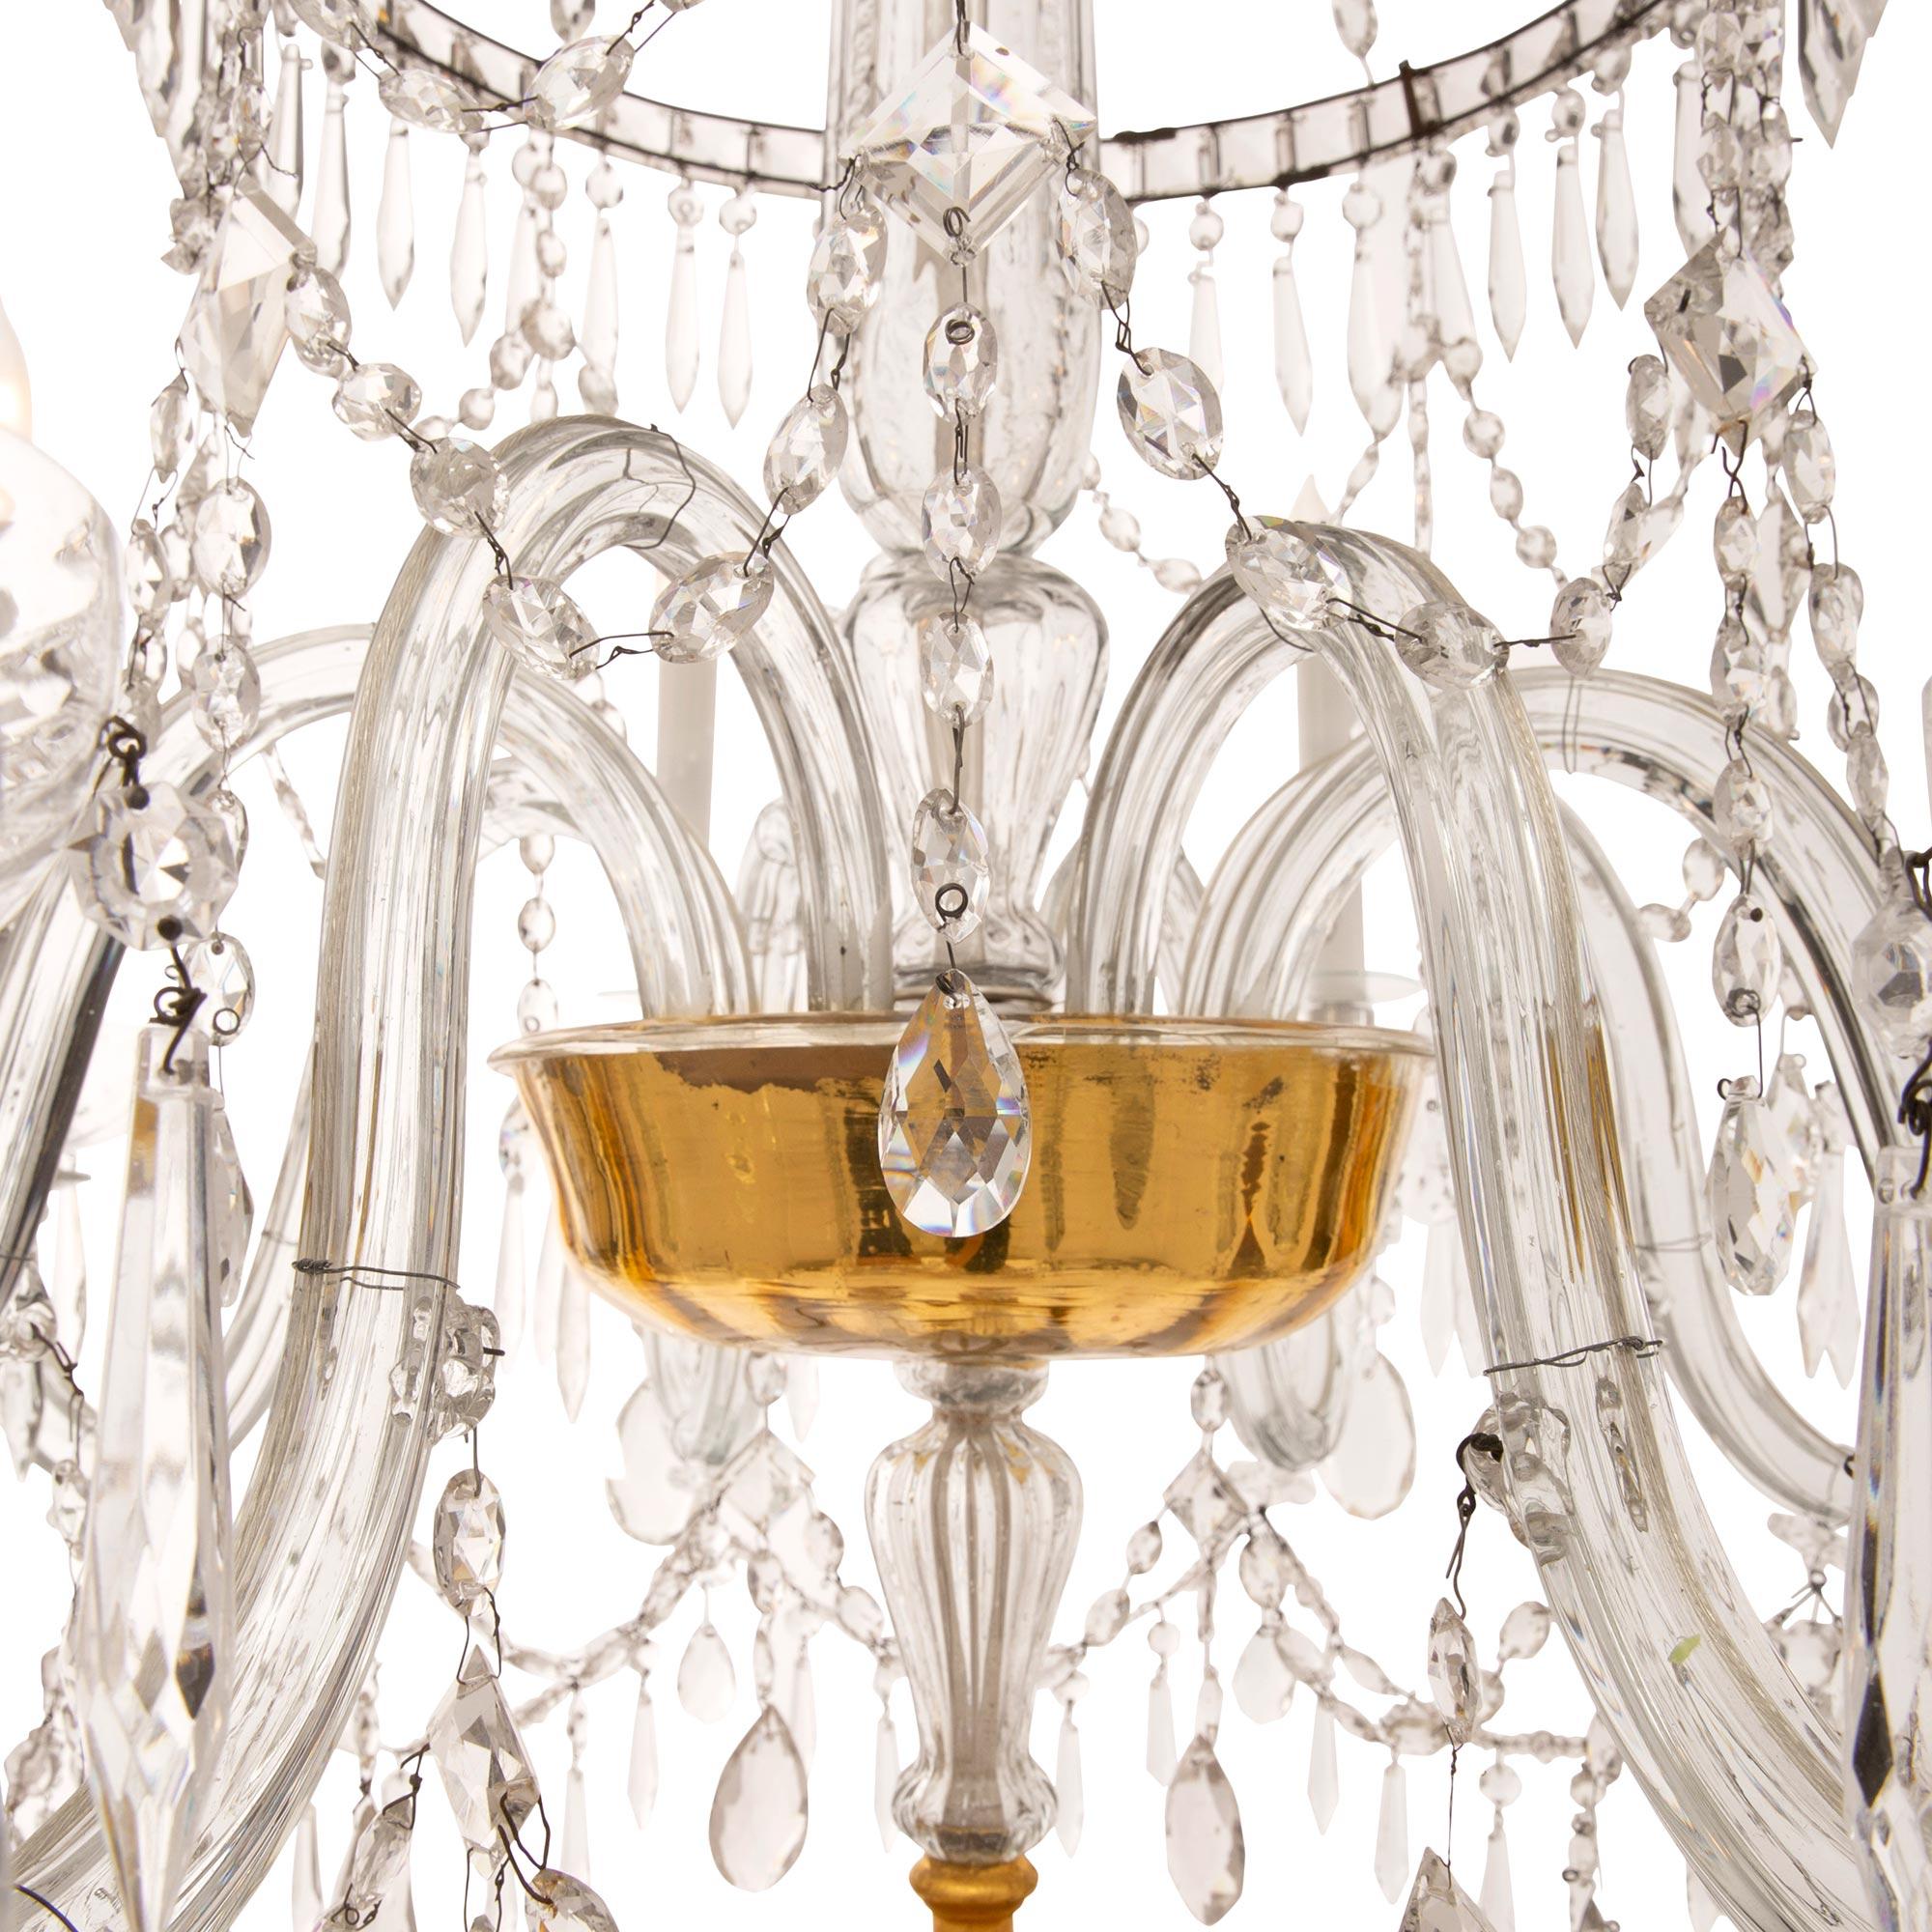 Italian 18th Century Venetian St. Murano Glass and Giltwood Chandelier For Sale 2